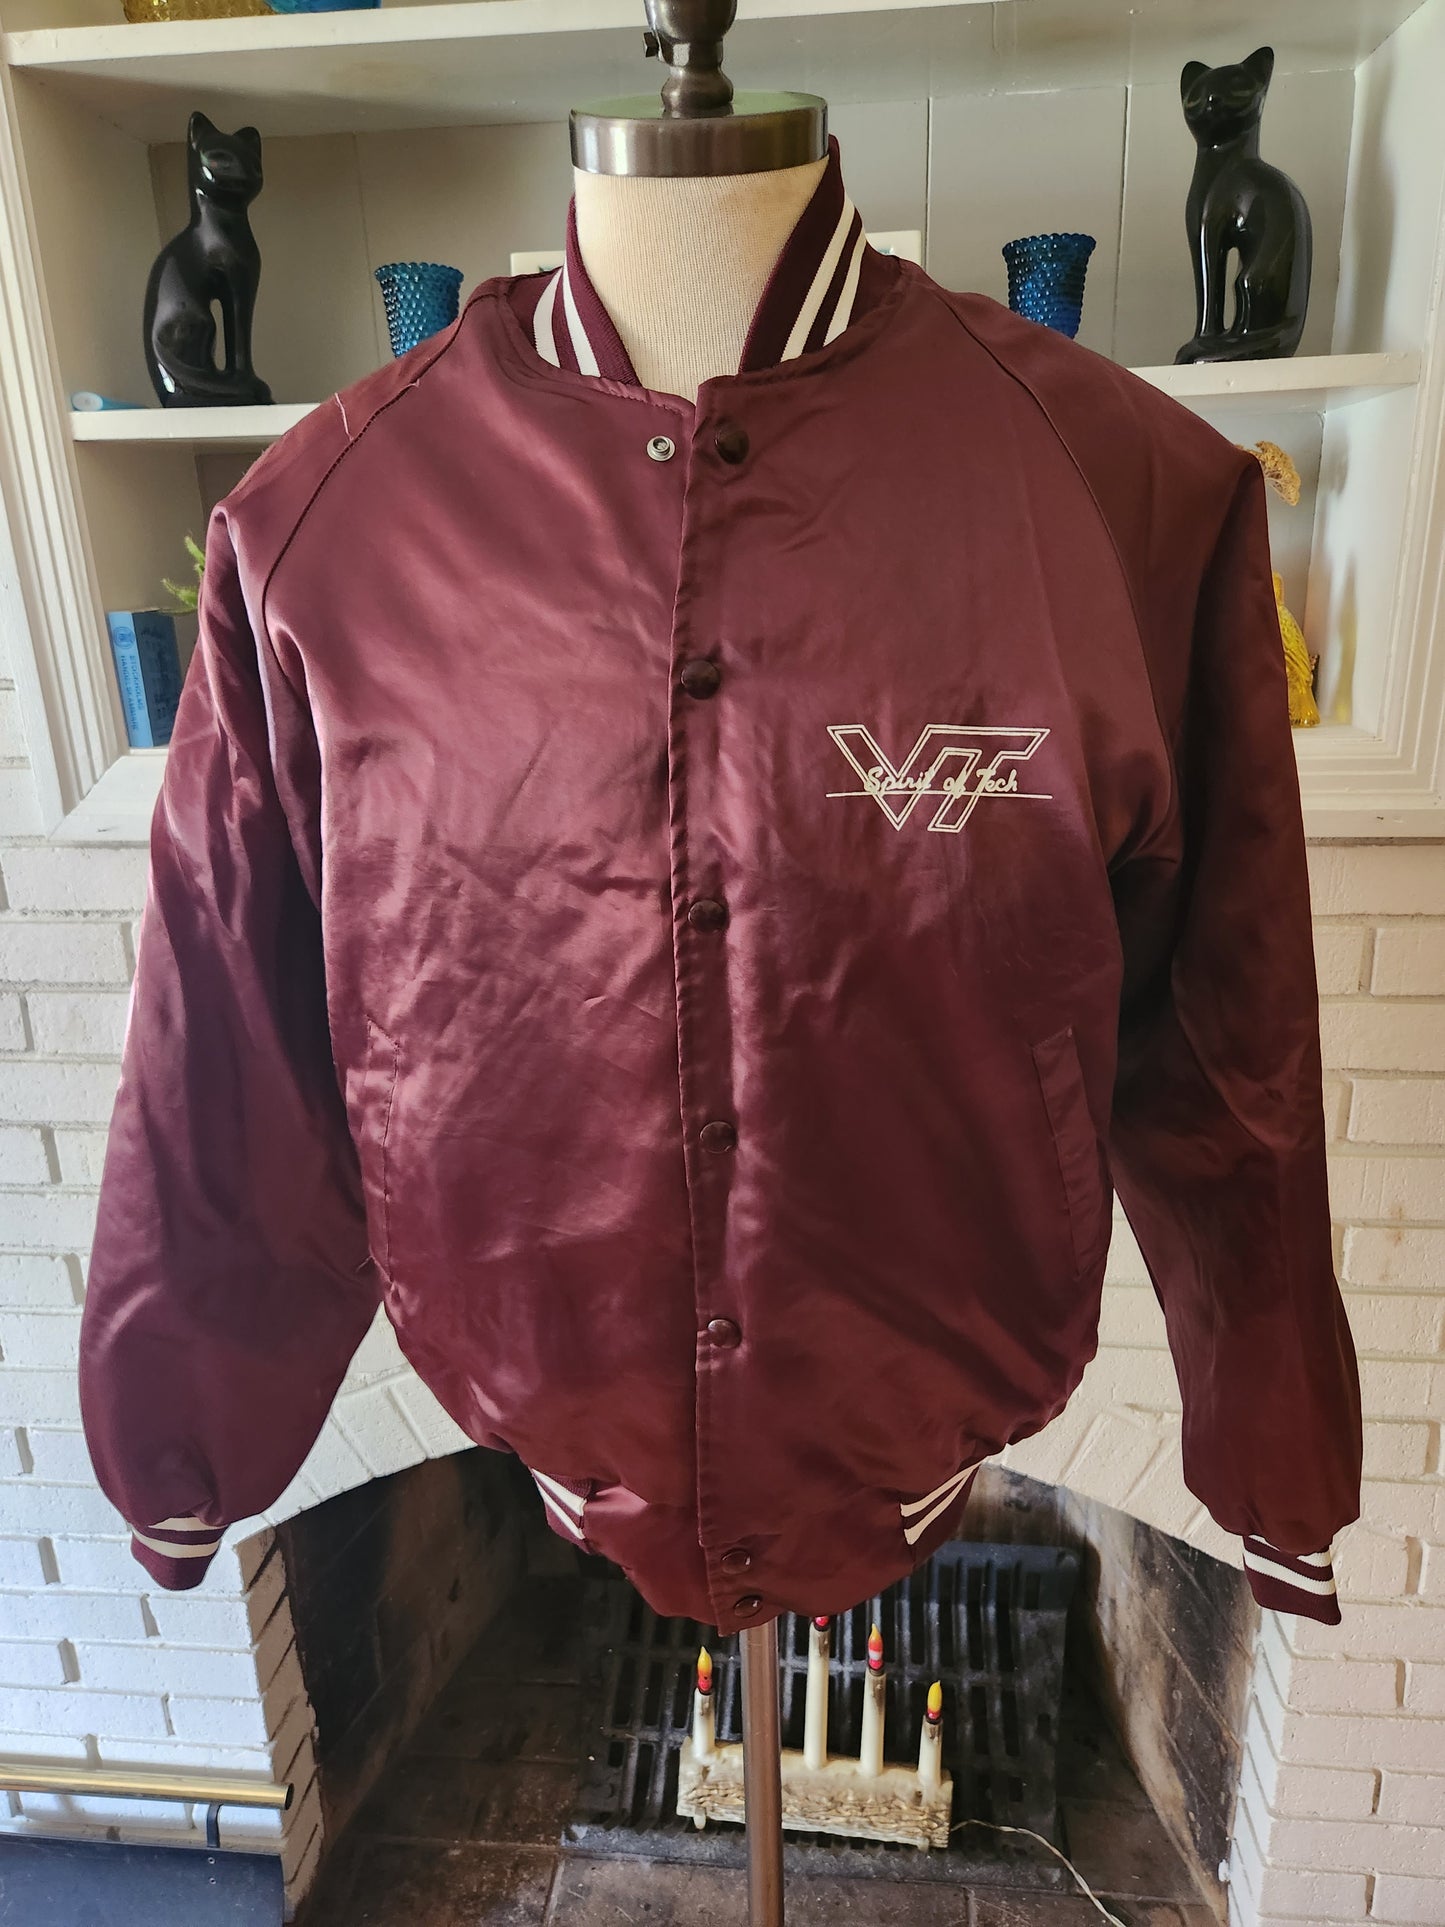 Vintage Virginia Tech Marching Band Jacket